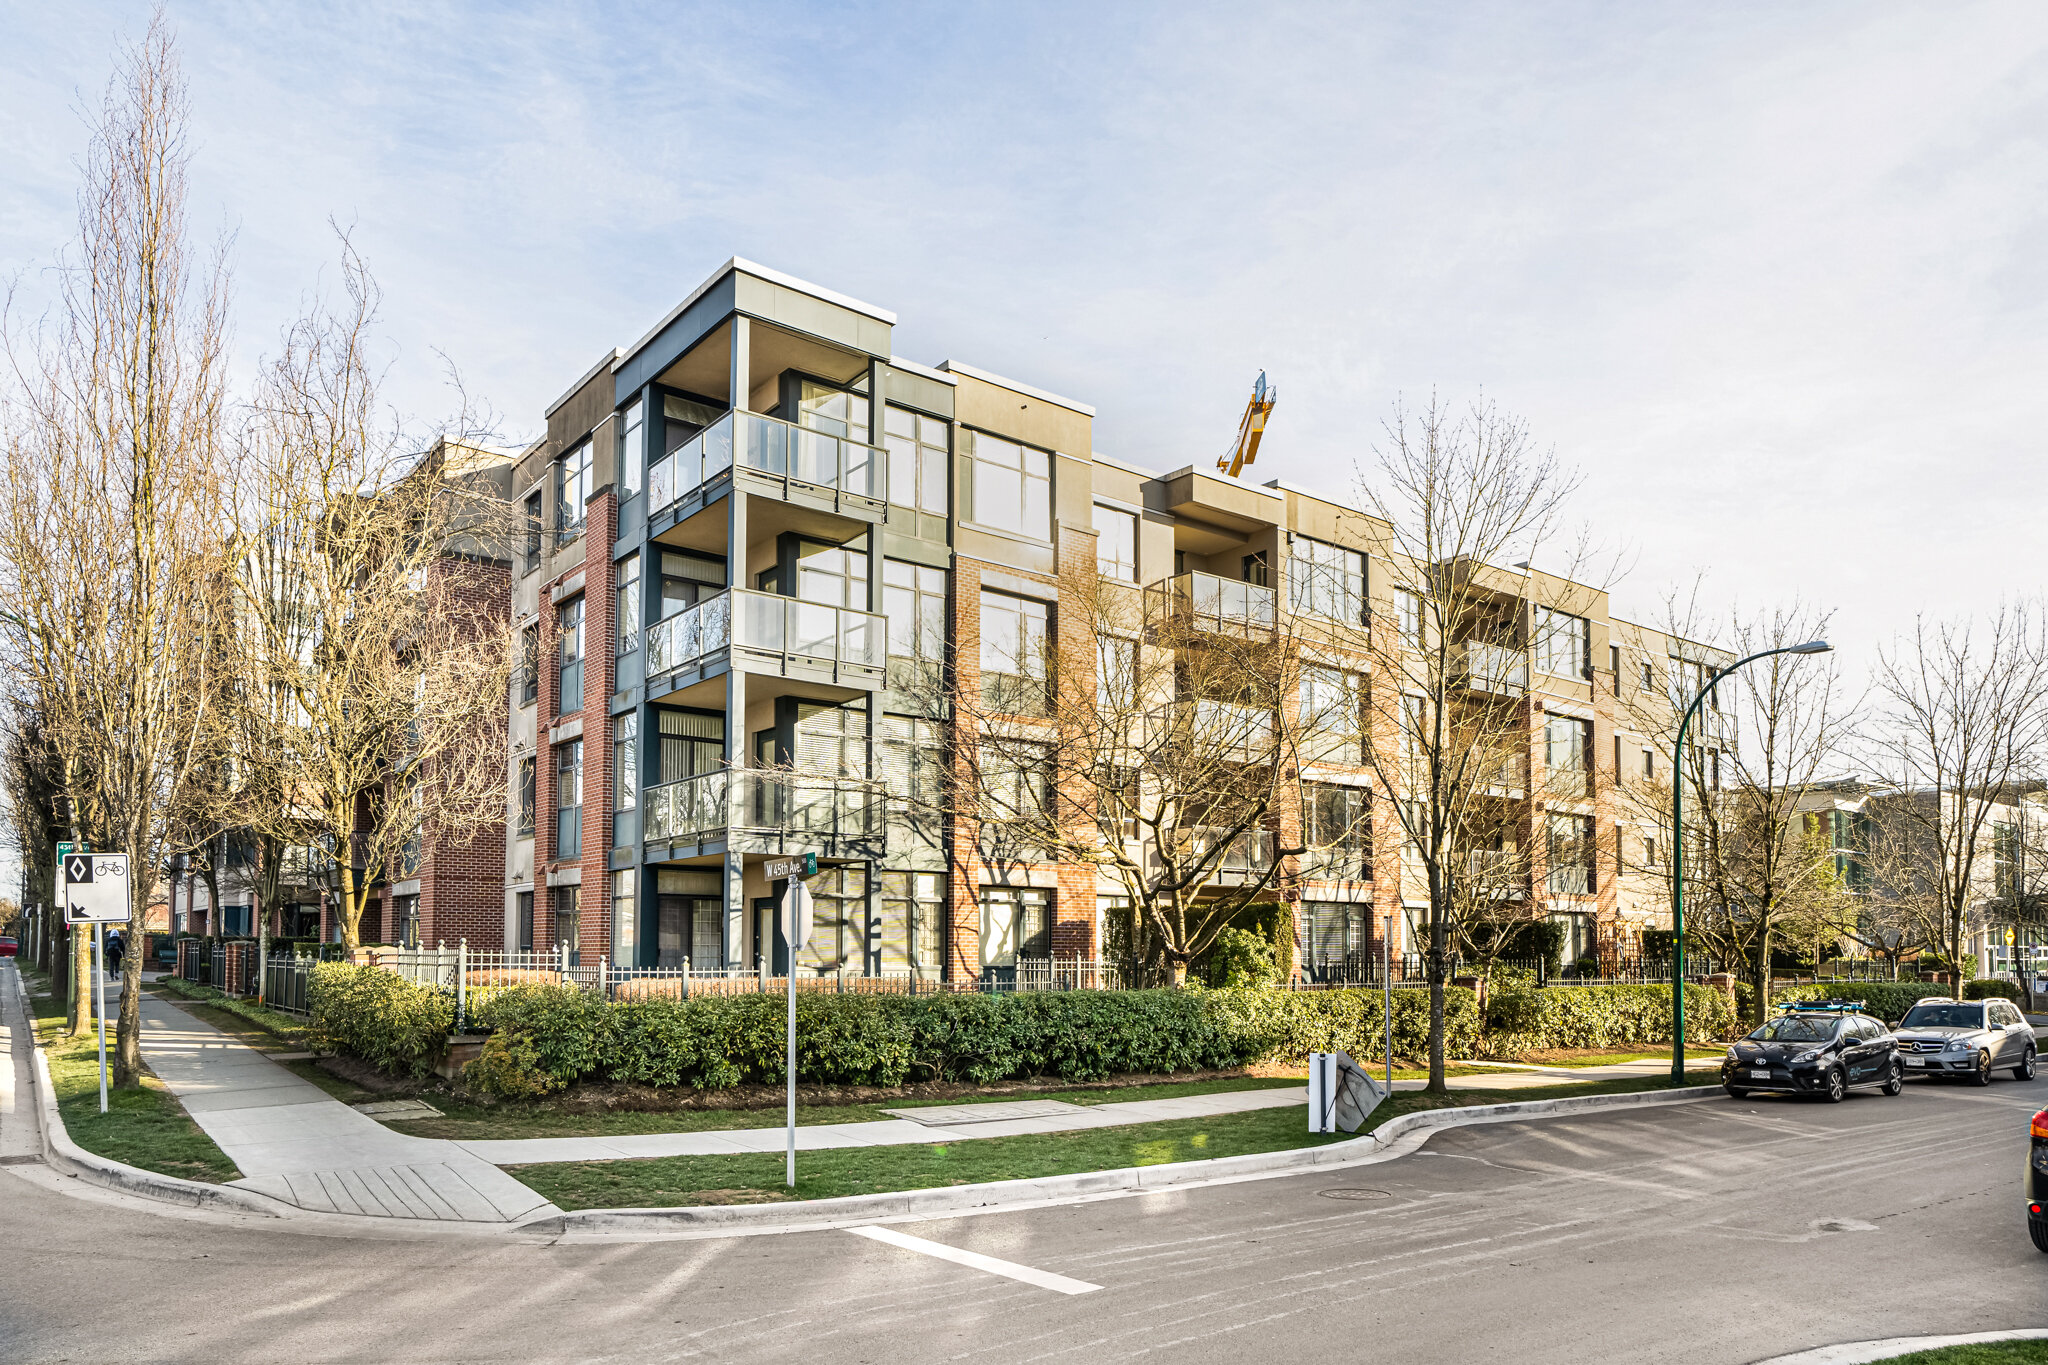 New Listing! 📍409 - 588 W 45th Ave, Vancouver
.
Asking Price: $1,230,000
Bedroom: 2 + 1 large Den/Dining room (can be converted to 3rd bedroom)
Bathroom: 2
Strata Fee: $689.82
Living Space: 1201 SF
Balcony Space: 110 SF
Area: Oakridge, Vancouver
Yea